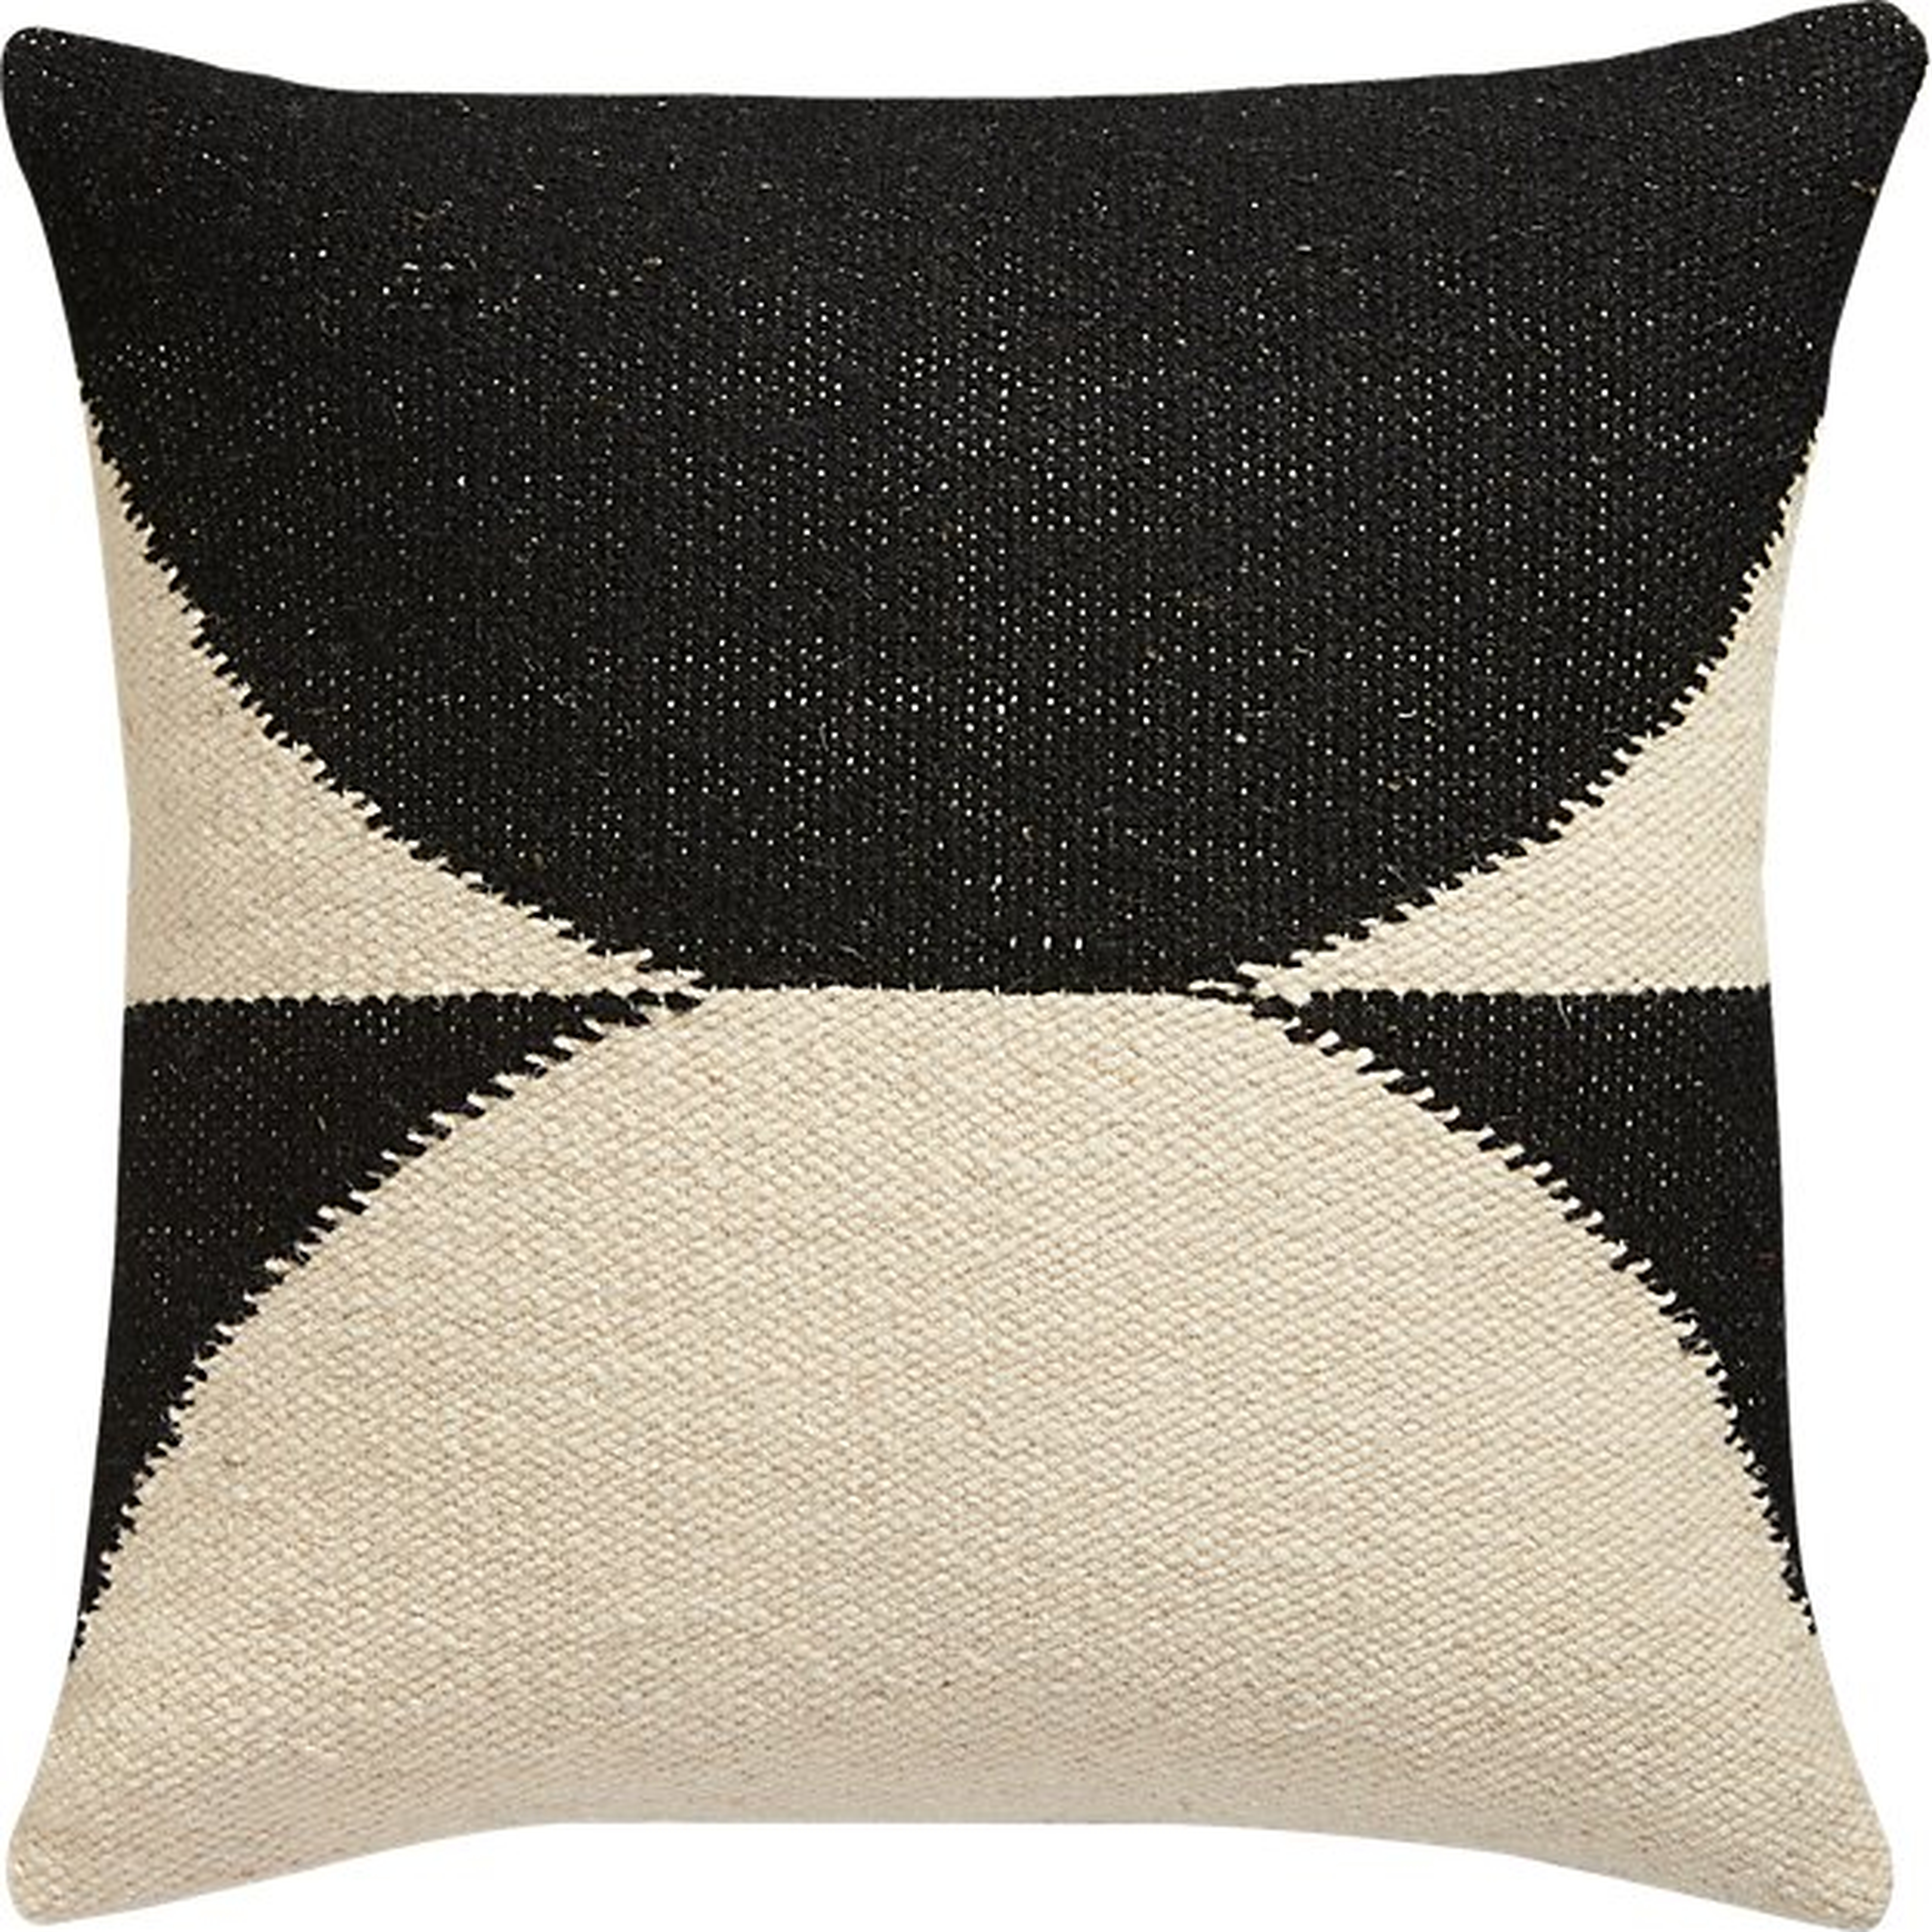 Reflect Black and White Throw Pillow with Feather-Down Insert 20" - CB2